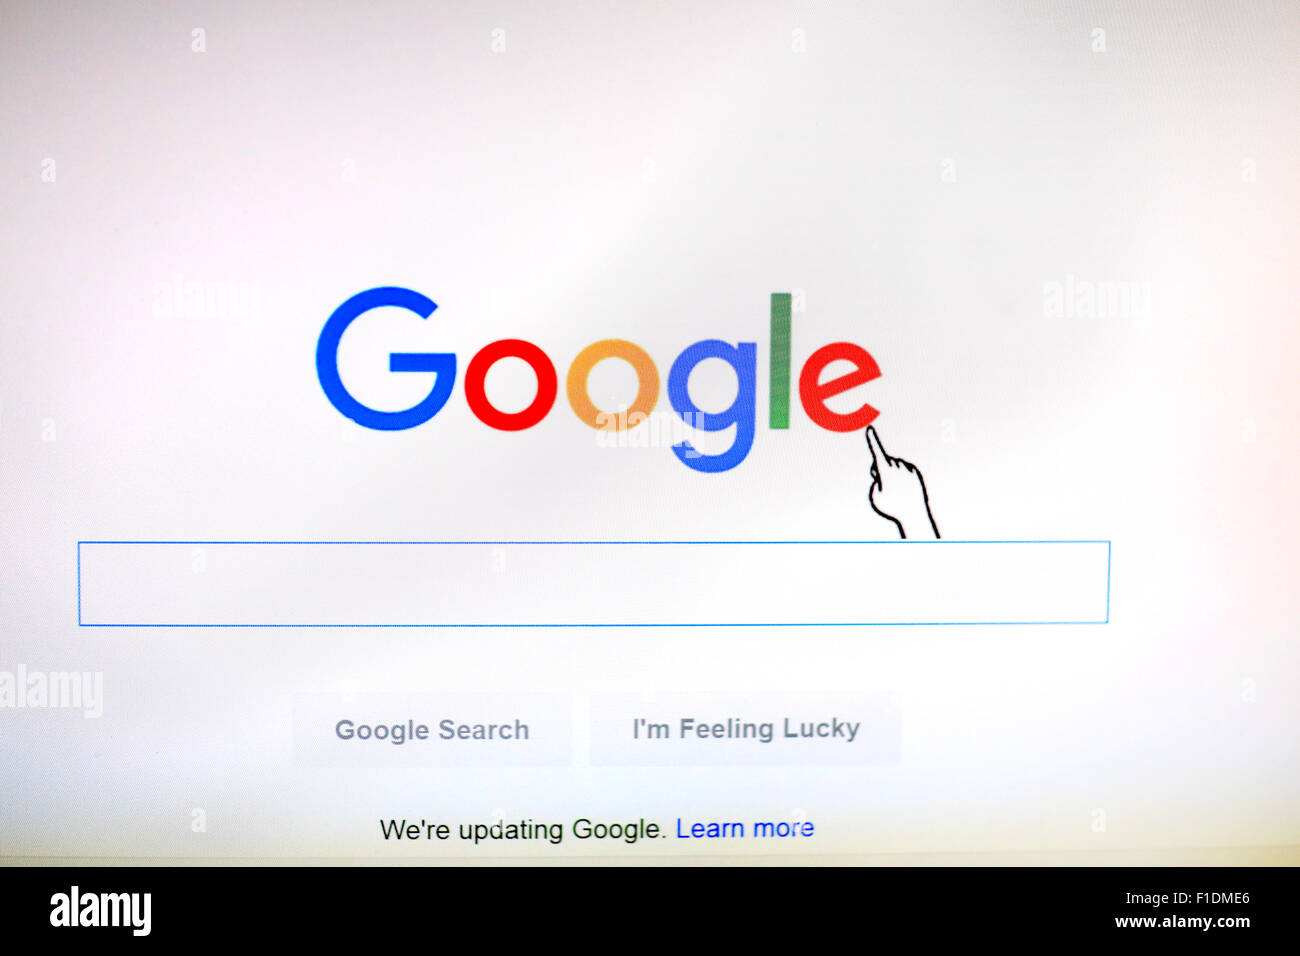 The new Google logo introduced on 1st September 2015 pictured on an internet browser Stock Photo